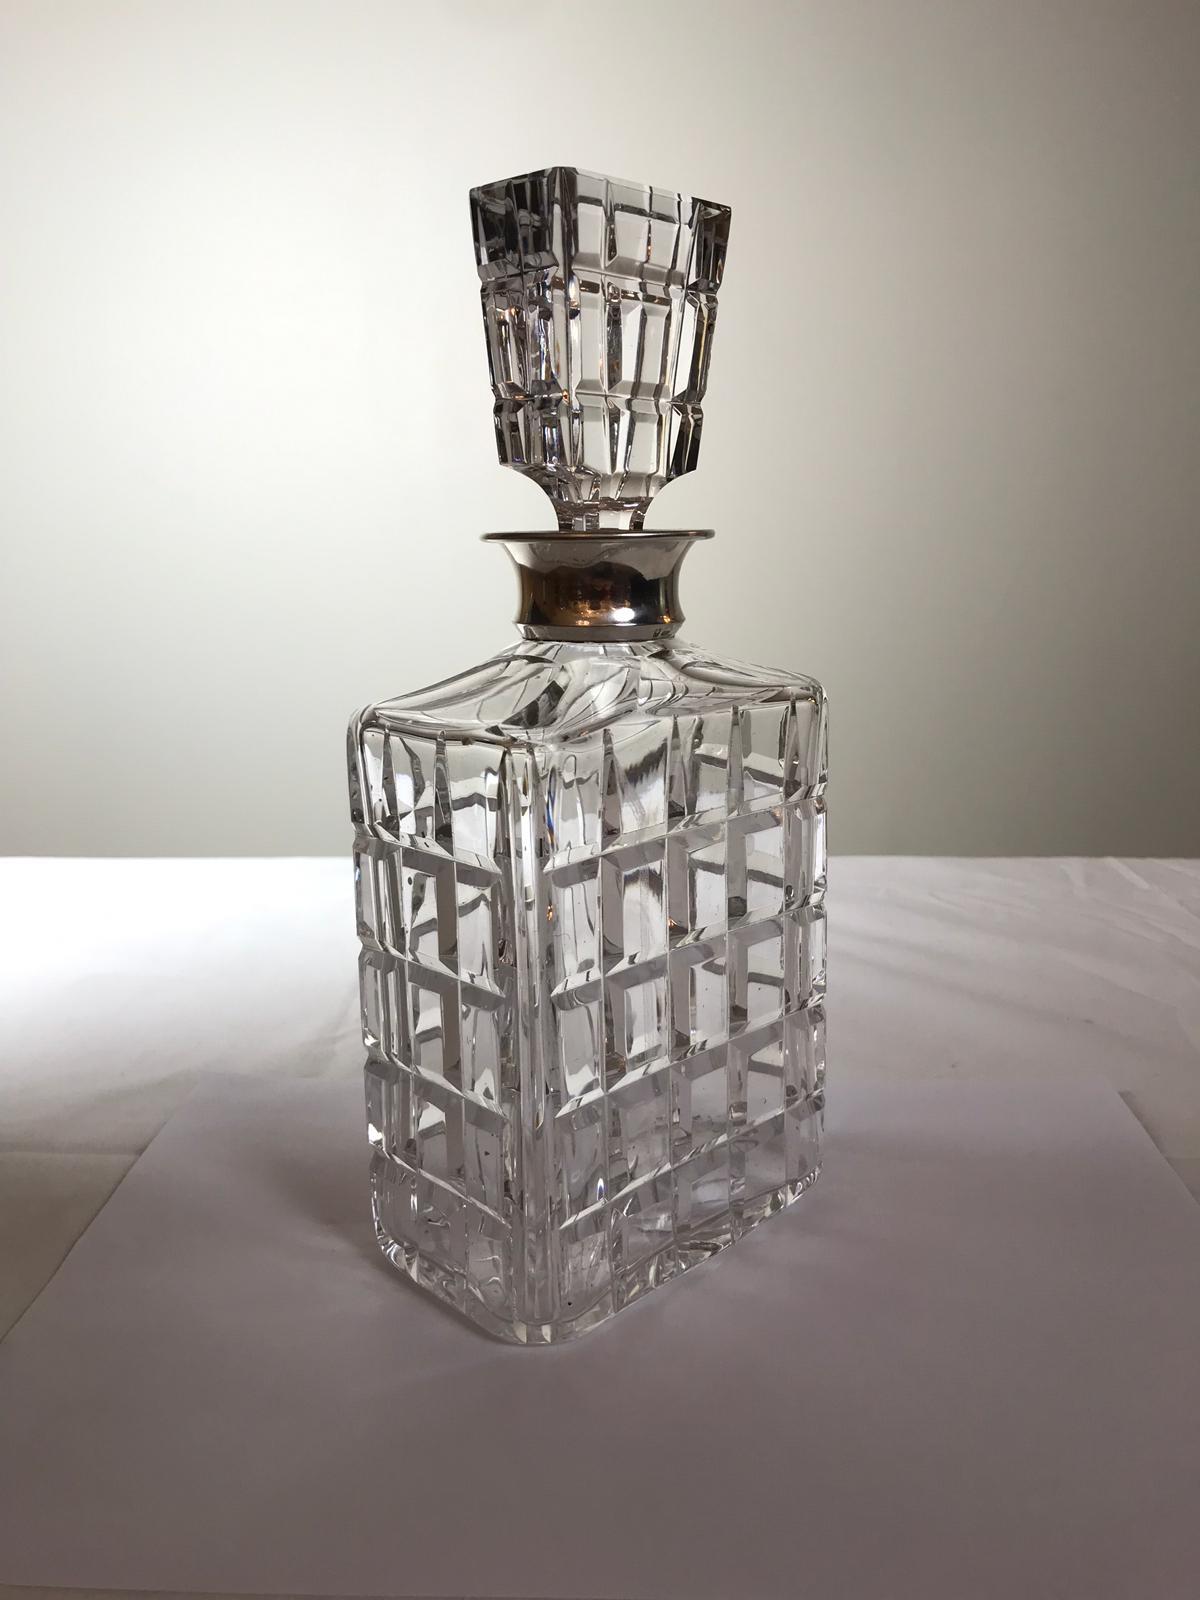 A crystal decanter and lid made by Wolfers Freres with a silver collar. The collar is marked 925 and has the Wolfers Freres stamp.